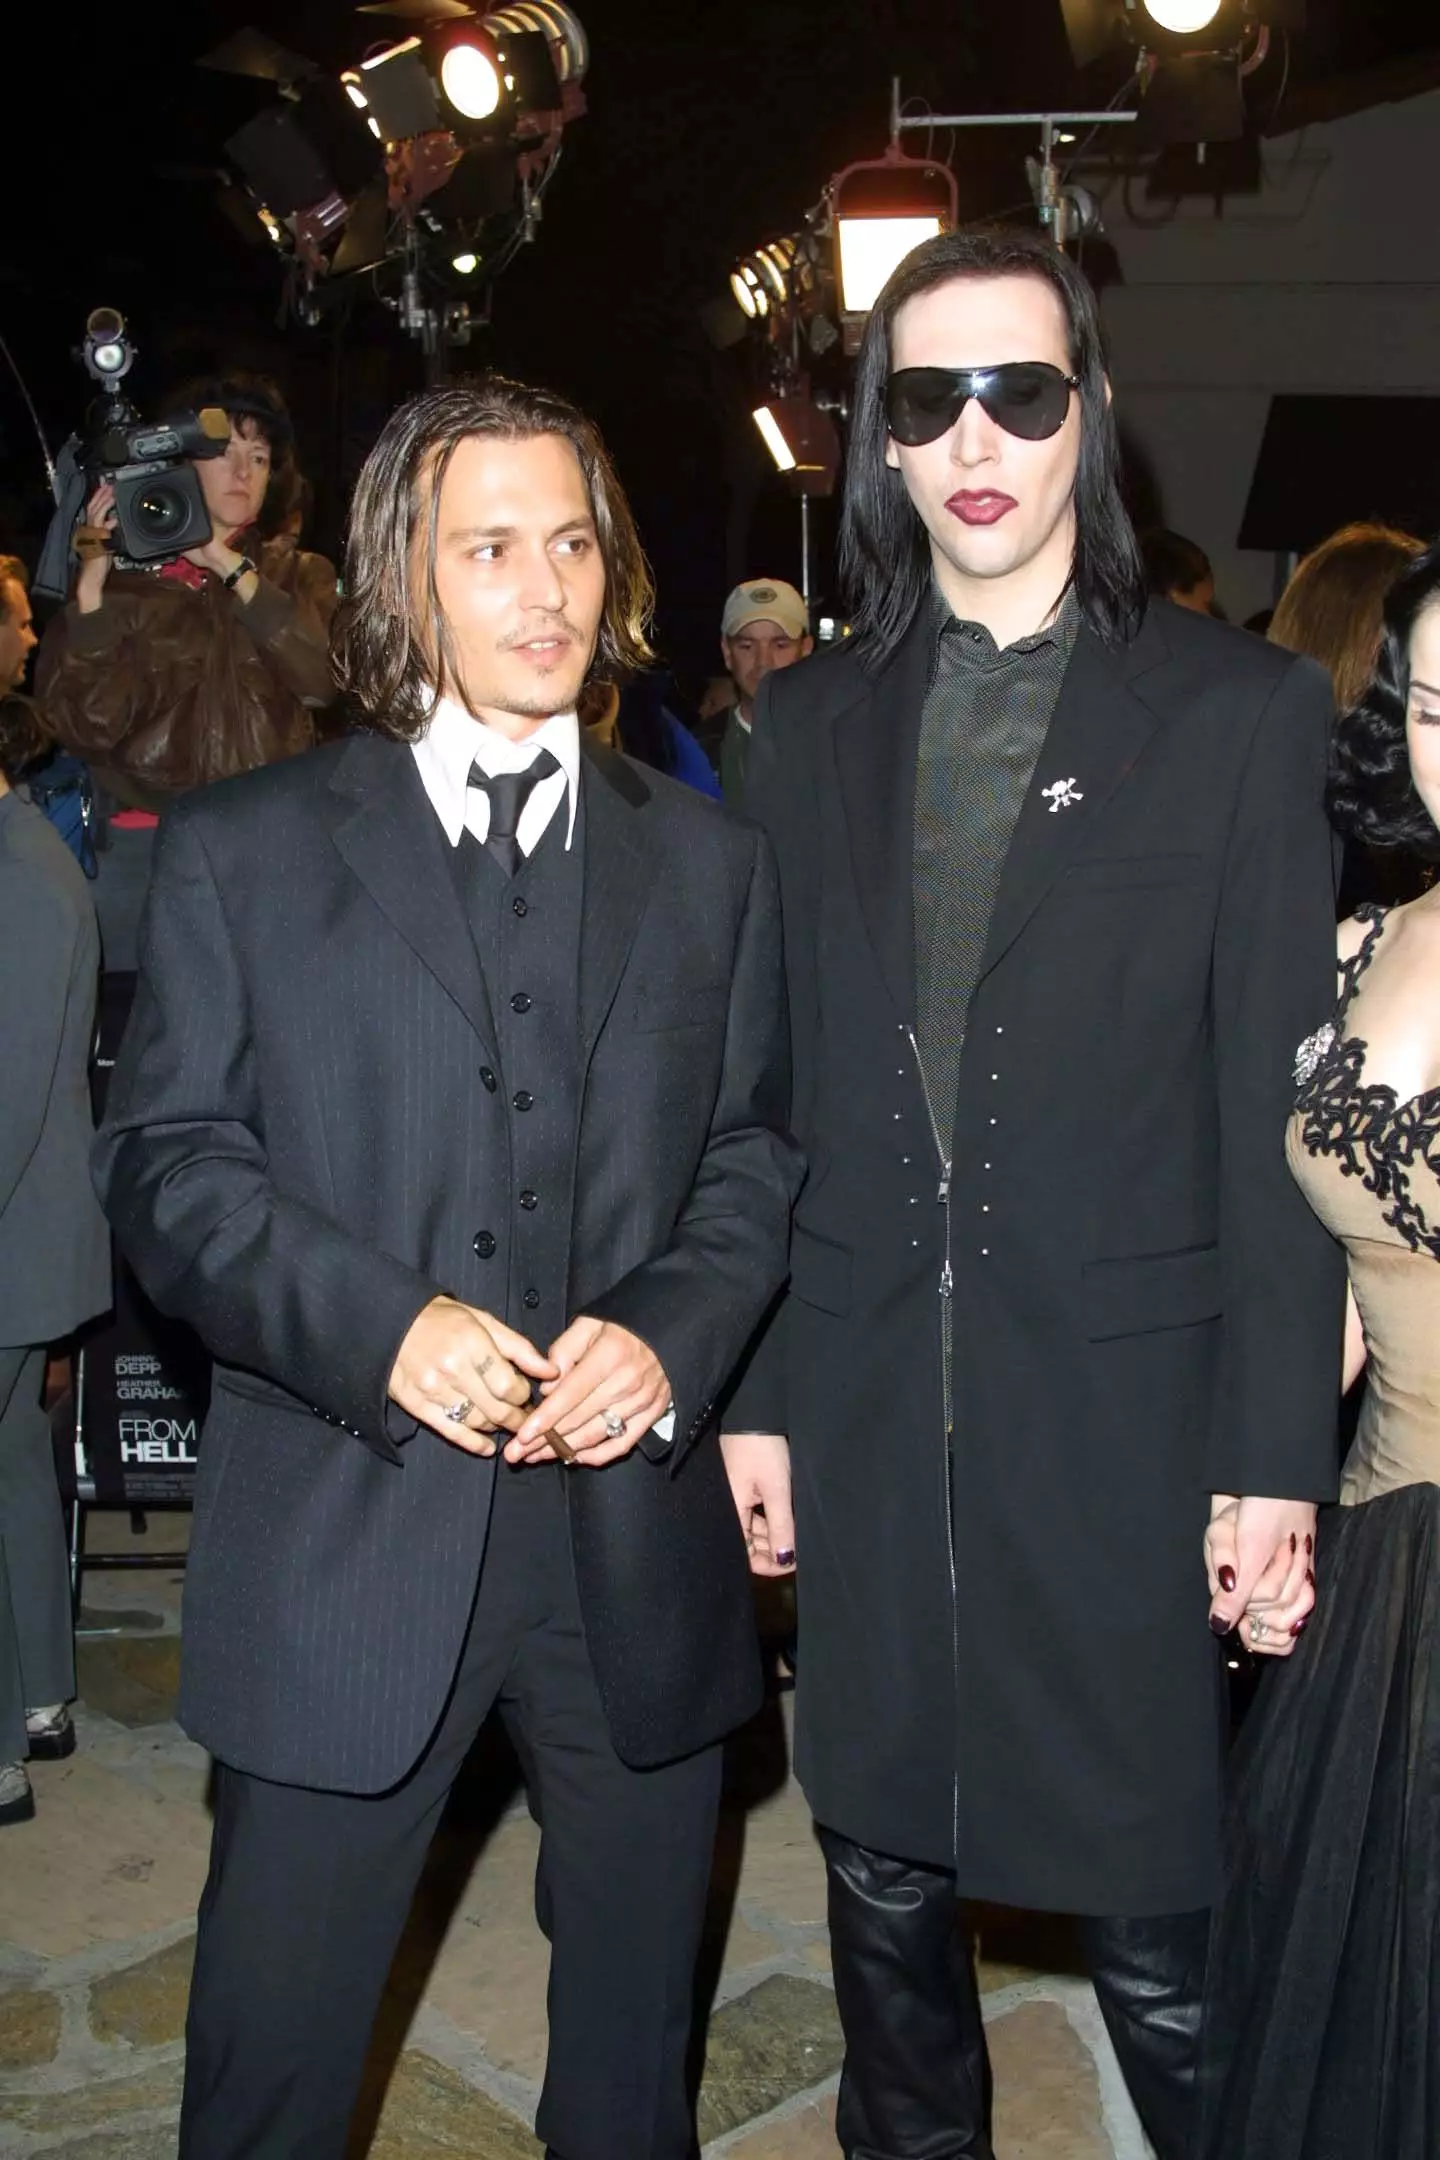 Depp and Manson are close friends (